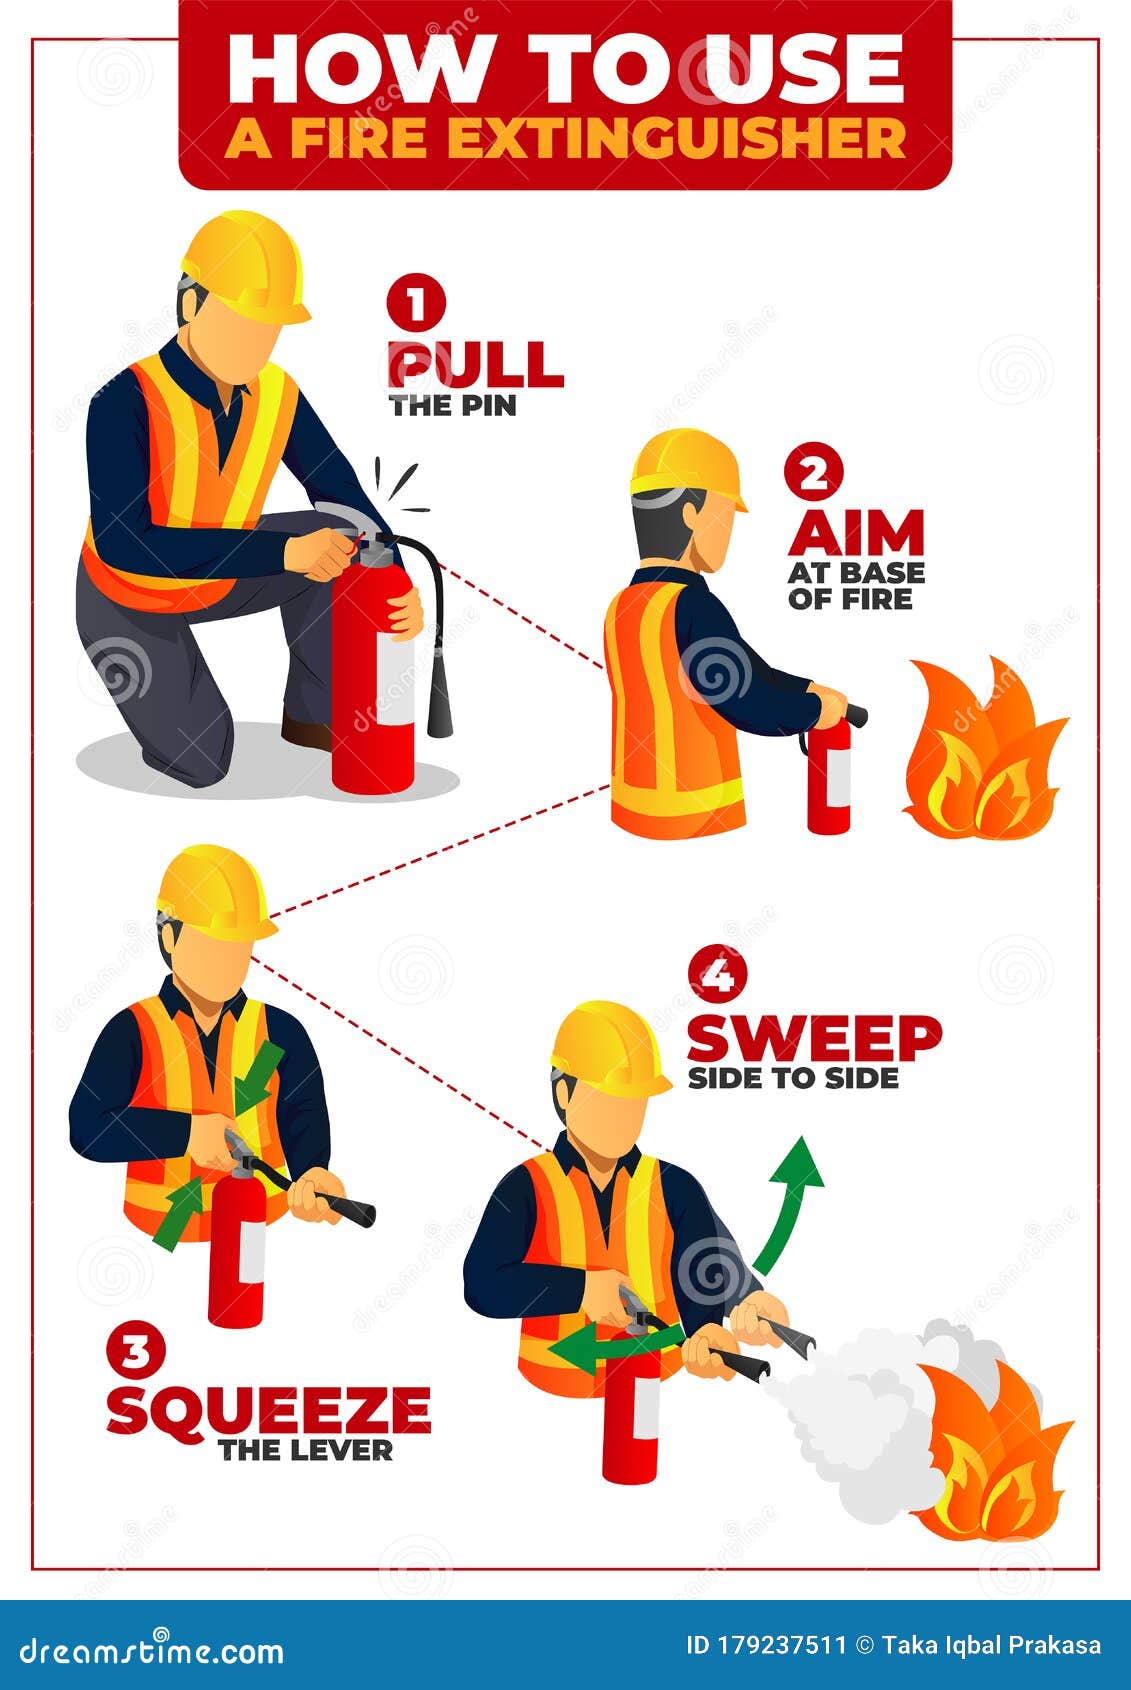 how to use fire extinguisher infographic poster